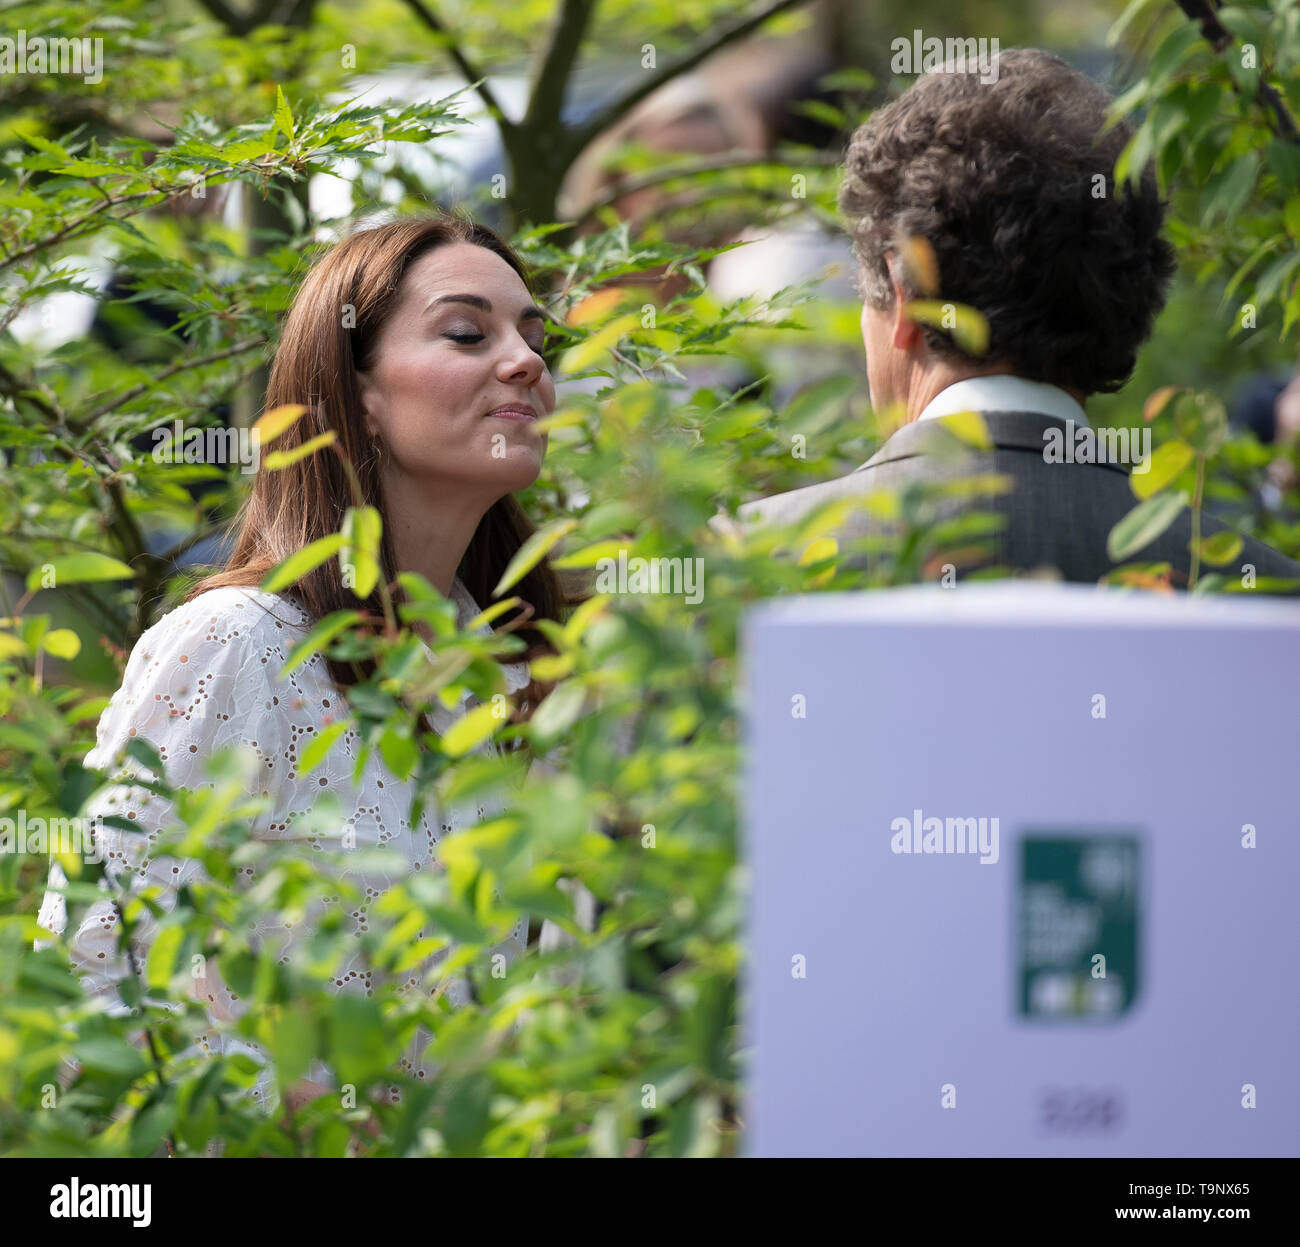 Royal Hospital Chelsea, London, UK. 20th May 2019. HRH The Duchess of Cambridge views her garden, designed with Andree Davies and Adam White at The RHS Back to Nature Garden at the Chelsea Flower Show 2019. Credit: Malcolm Park/Alamy Live News. Stock Photo